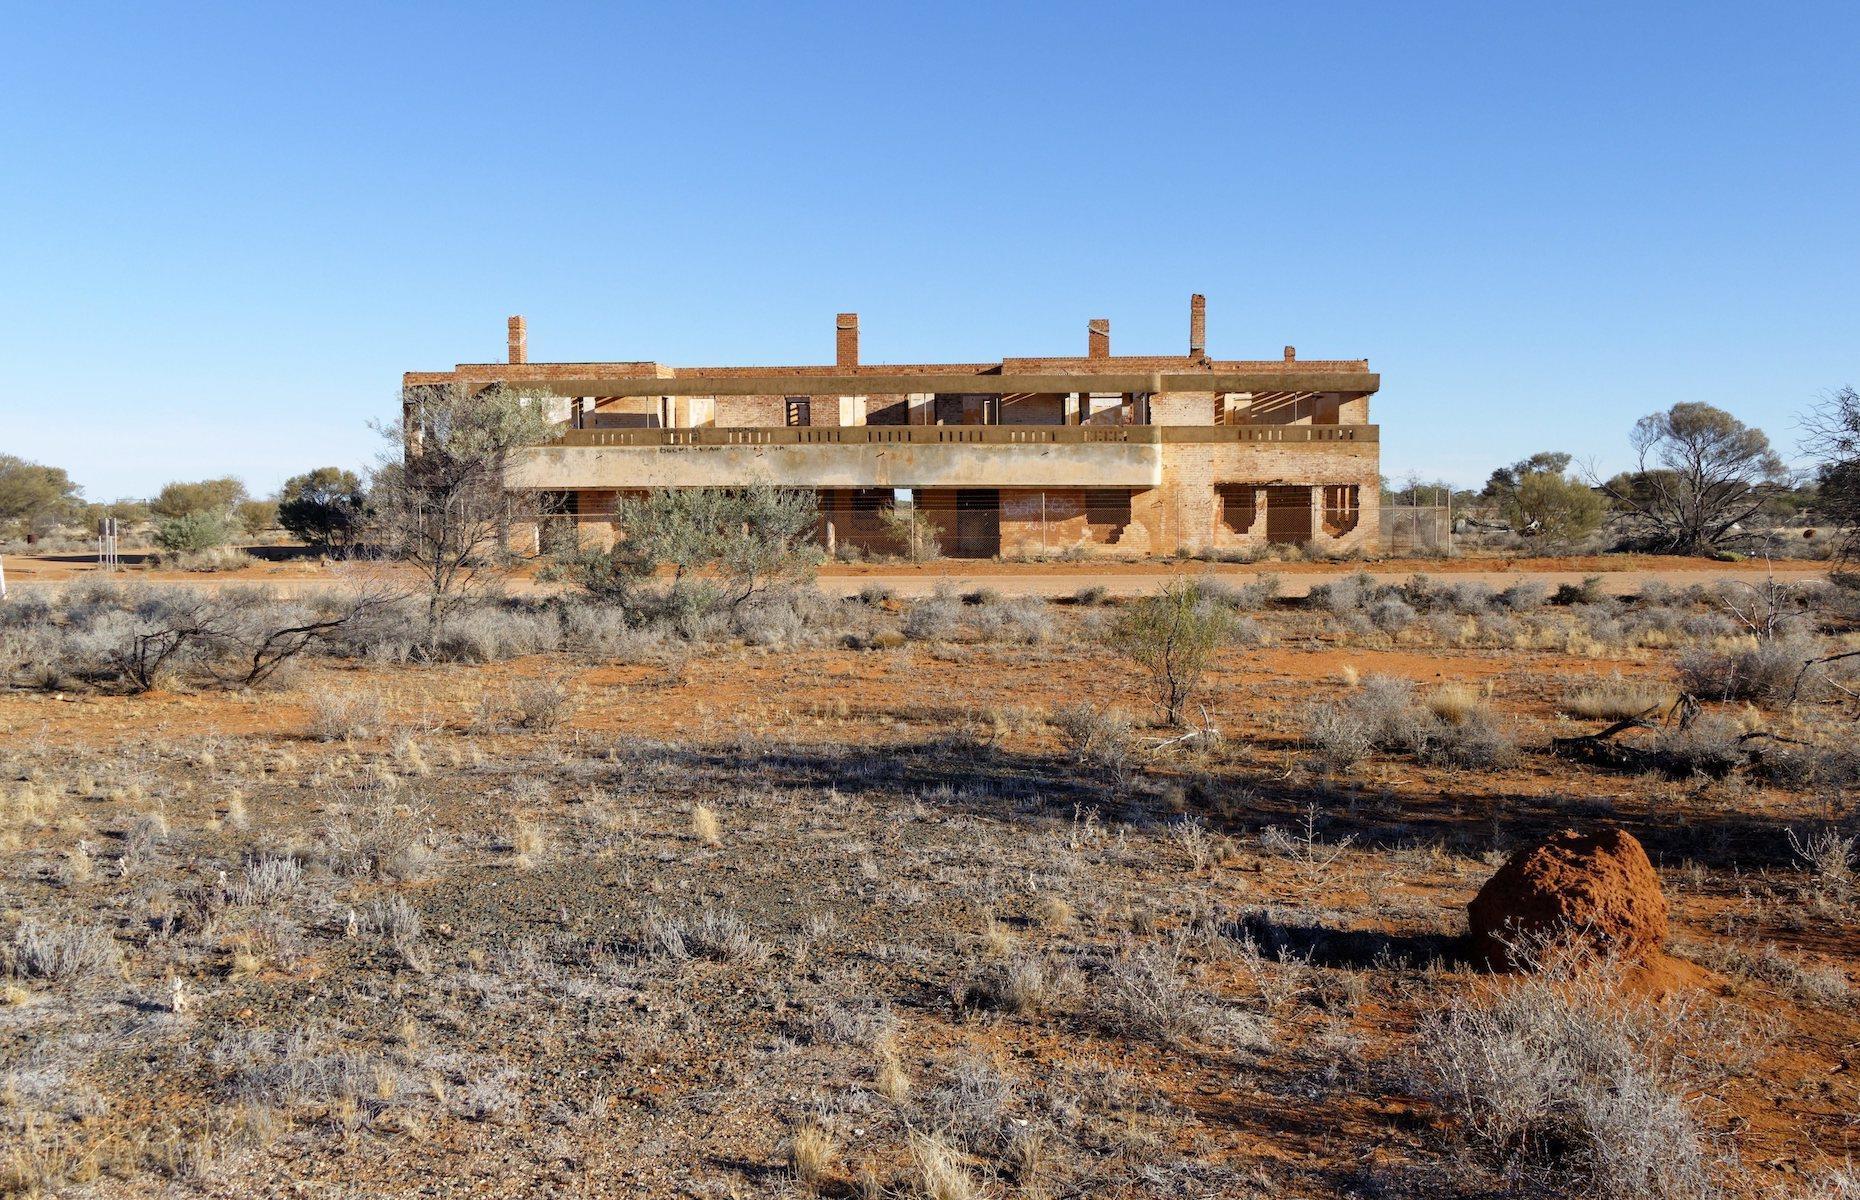 Surrounded by dusty scrub, the empty shell of this Art Deco-style hotel was once the hub of a busy mining settlement known as Big Bell. It was said to have had the longest bar in all of Australia at the time. The Big Bell Mine opened here in the early 1900s and the town was established in 1936, emptying in 1955 when the mine closed. Now the ghost town is deserted bar the occasional curious passer-by on their way to nearby Cue, an outback town known for its charming heritage buildings.